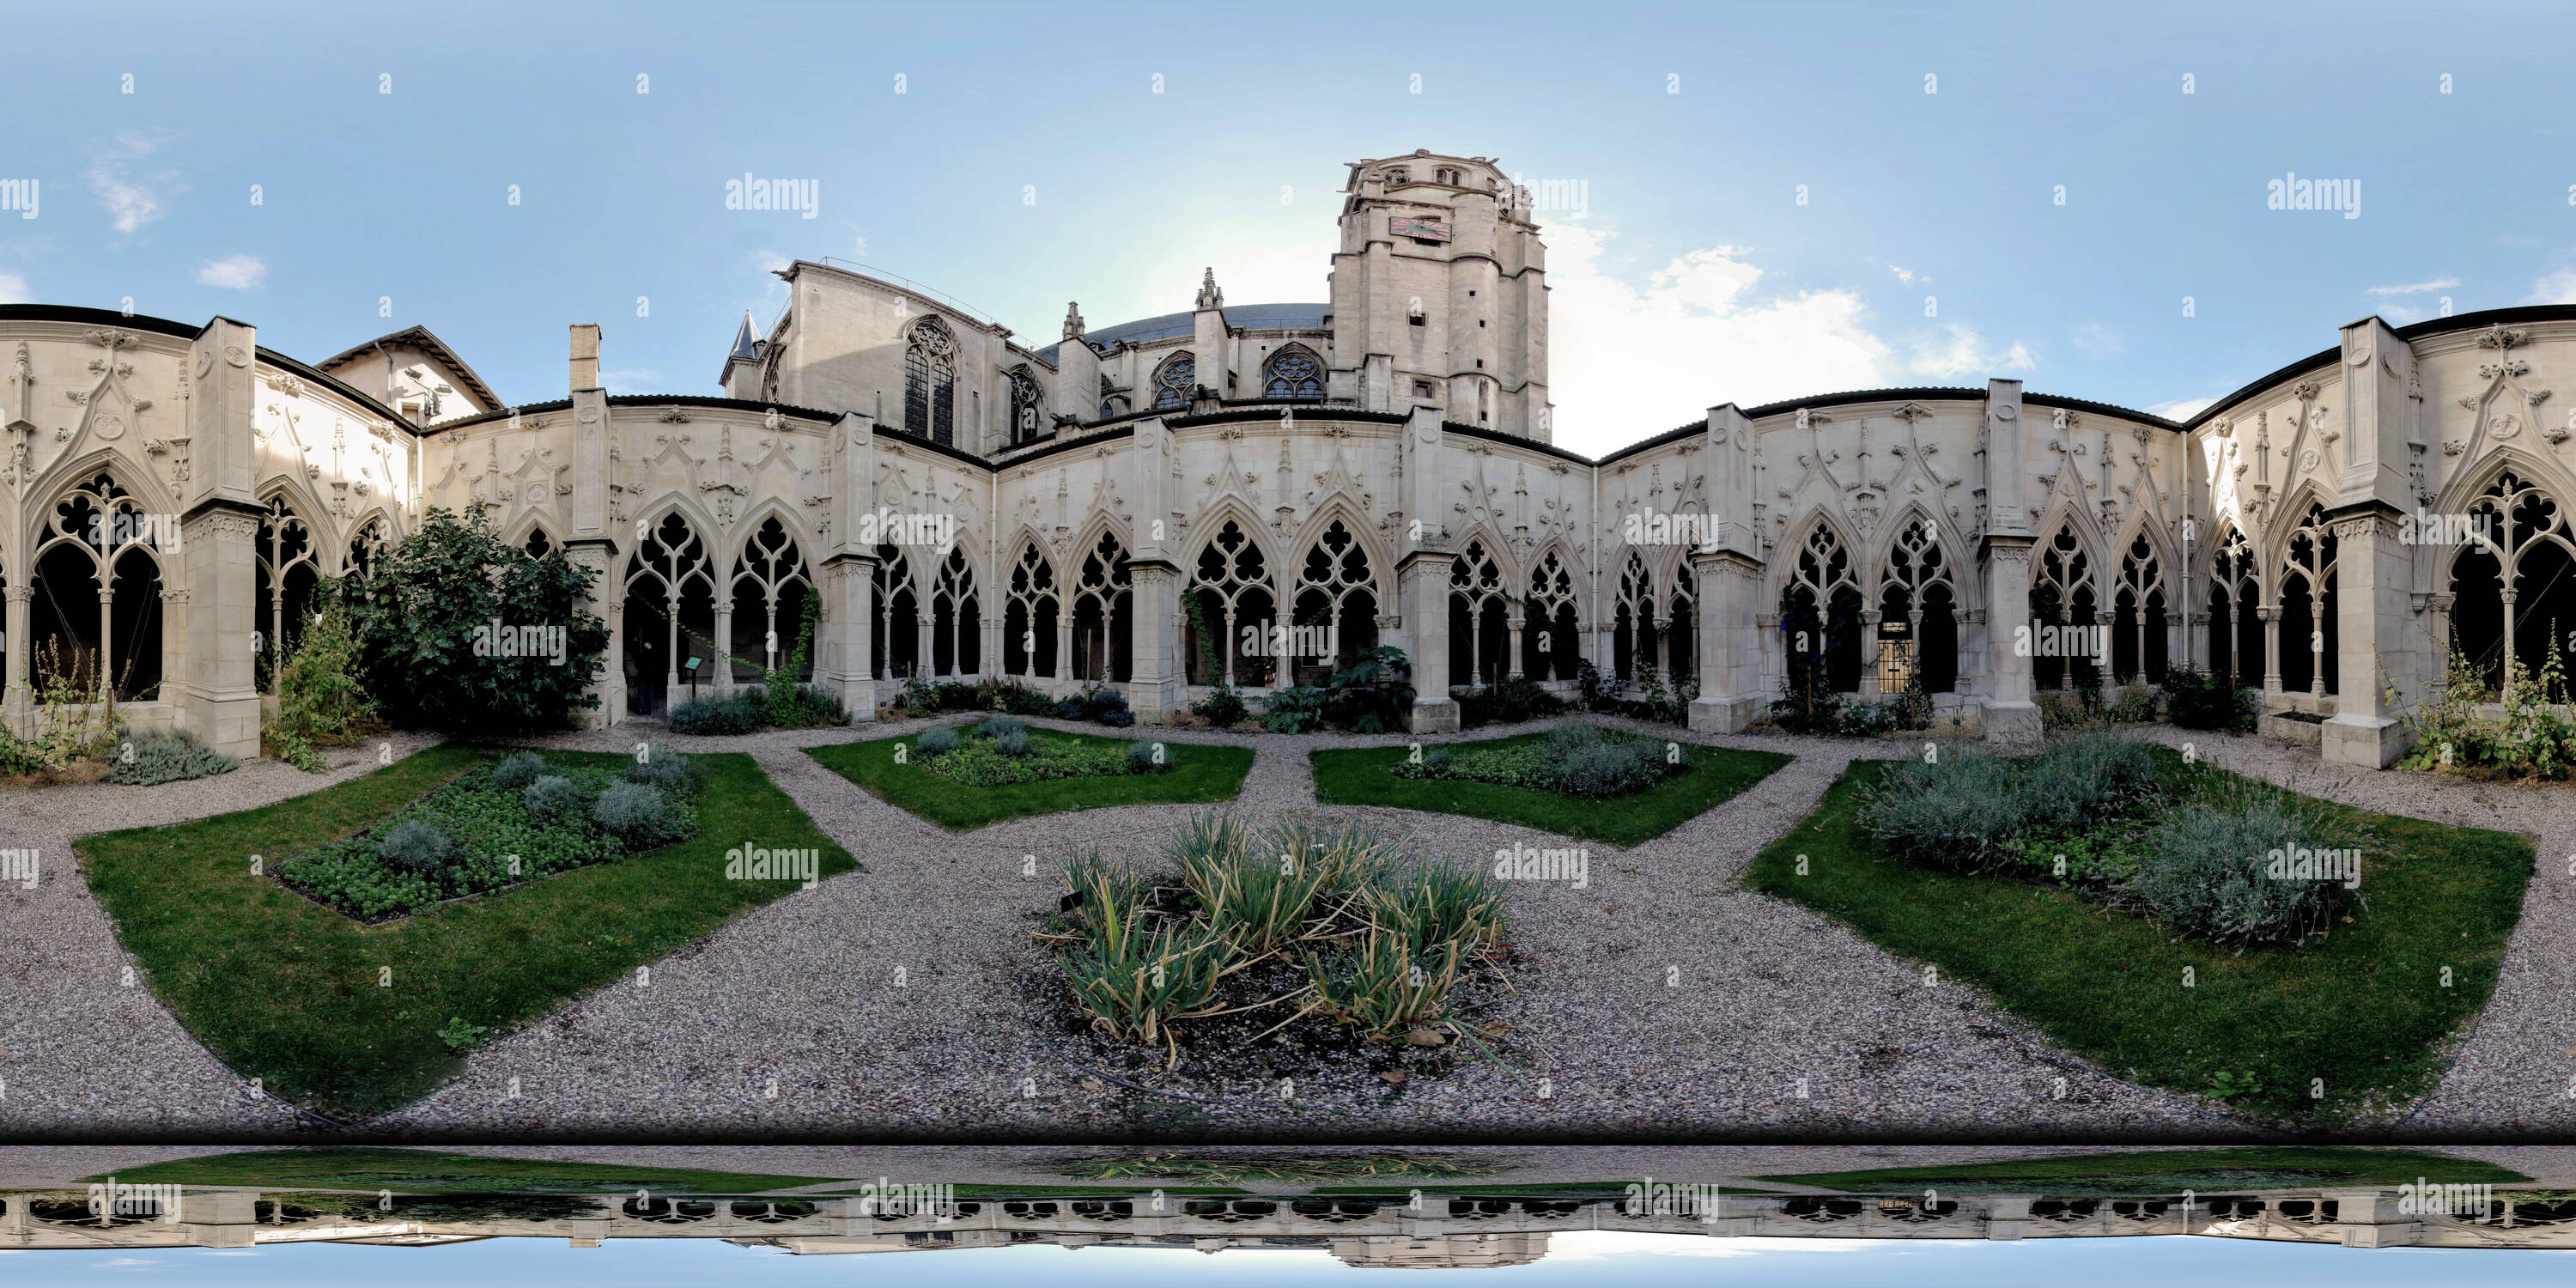 360 degree panoramic view of St Gengoult (Cloister), Toul, 2016-09, freehand